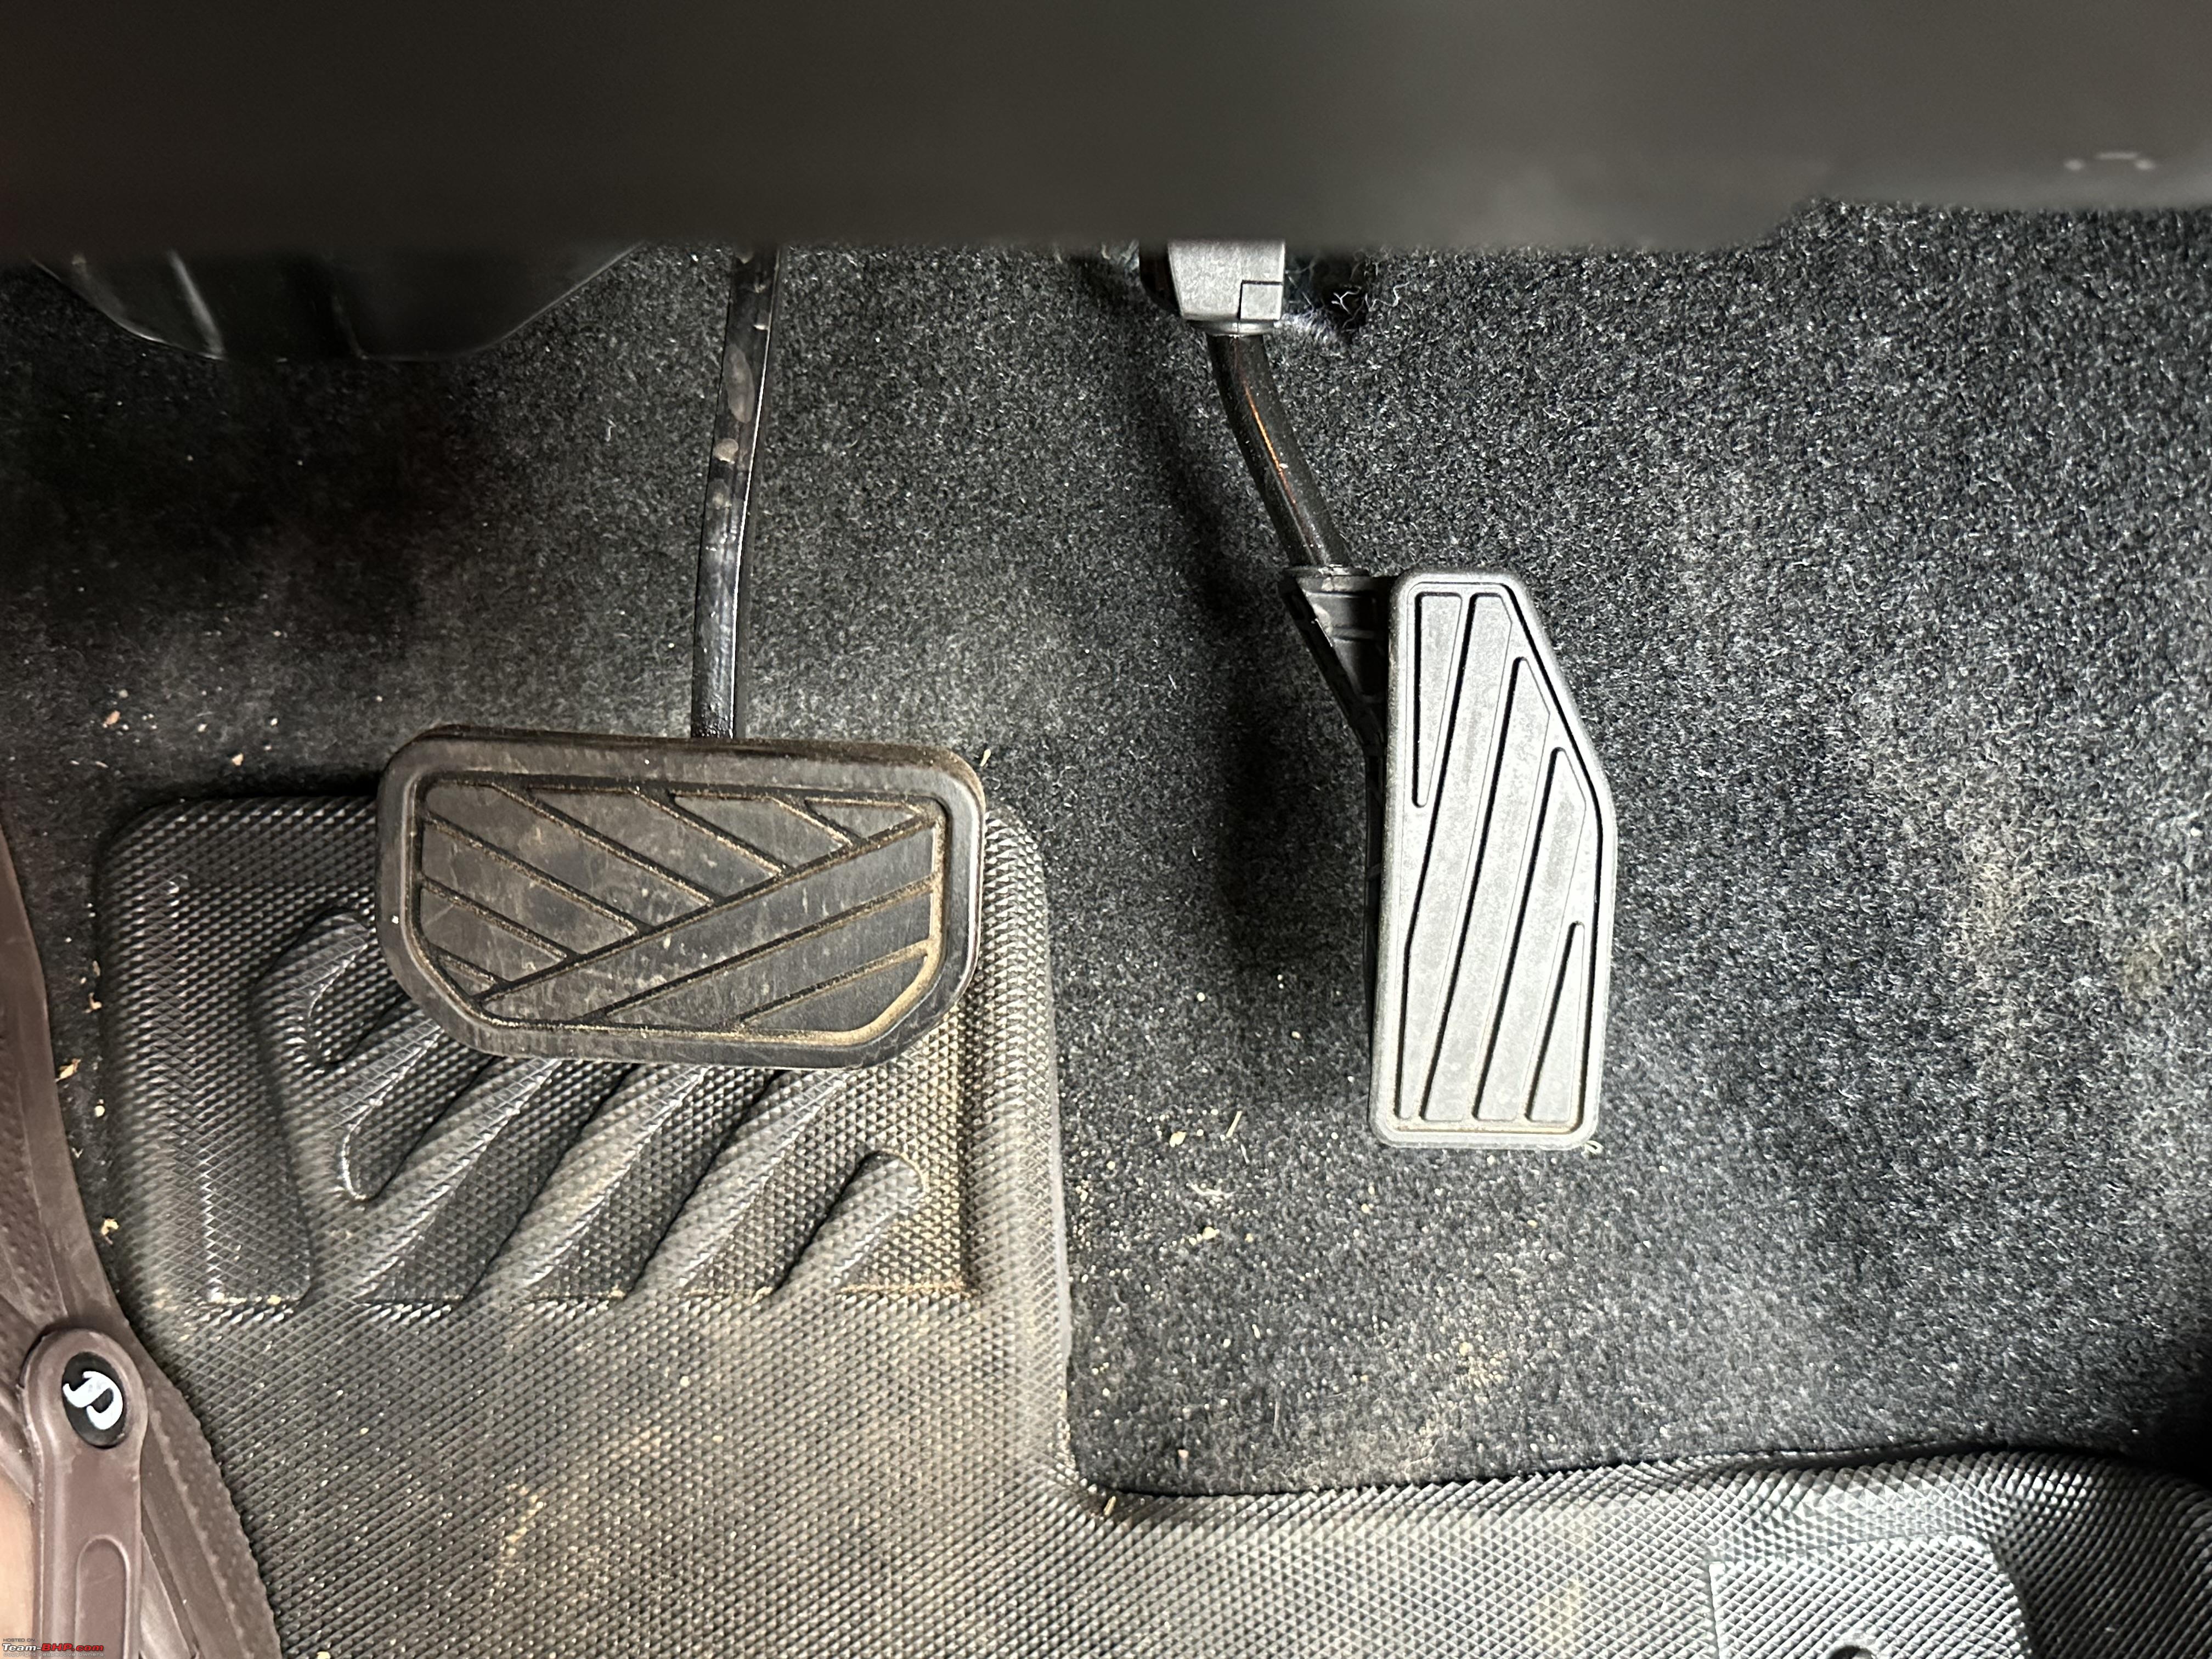 What type of Accelerator pedal do you prefer - Organ vs Suspended? -  Team-BHP